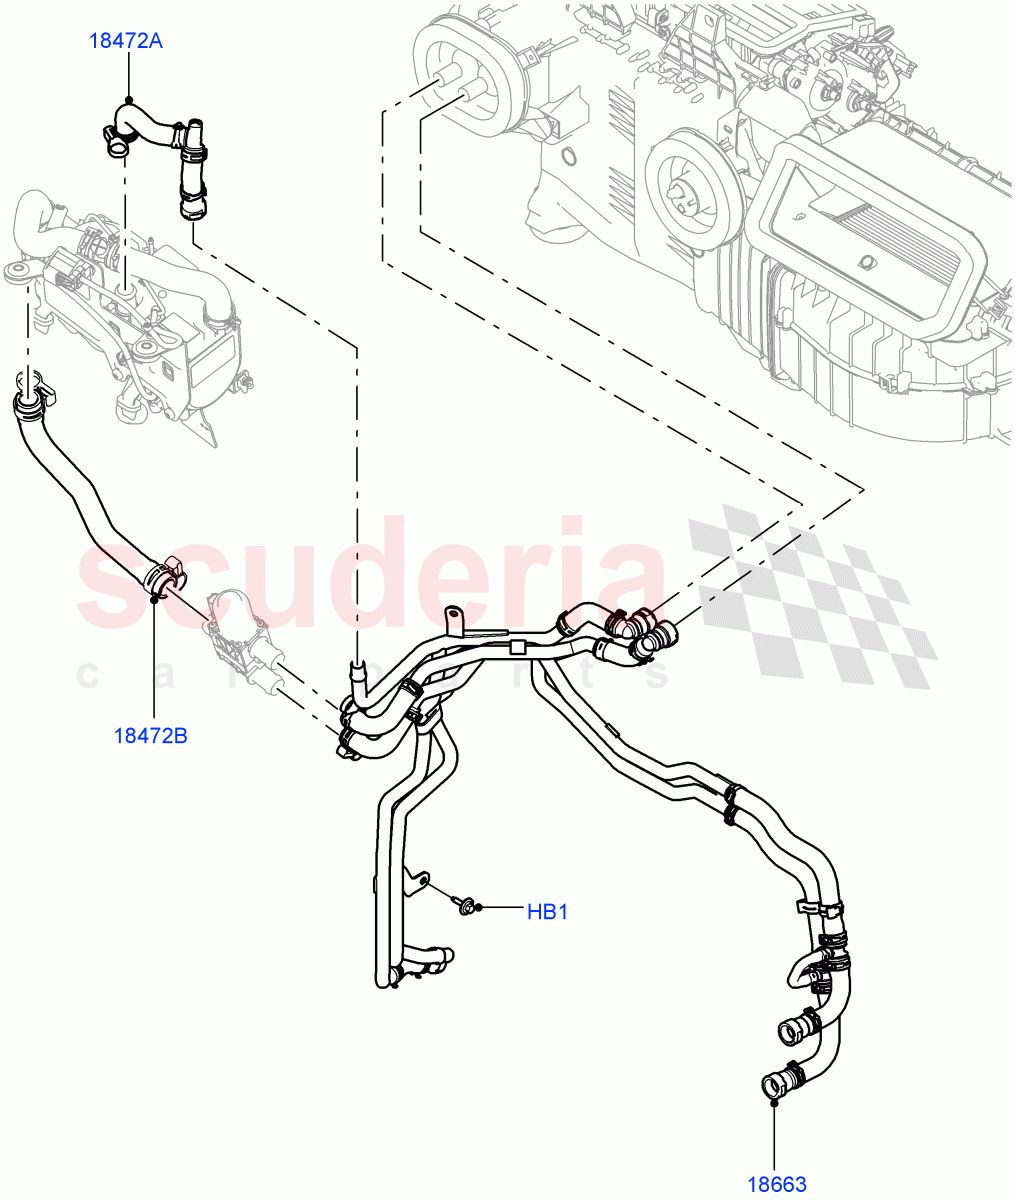 Heater Hoses(Front)(2.0L I4 DSL HIGH DOHC AJ200,With Fuel Fired Heater,With Air Conditioning - Front/Rear,Park Heating With Remote Control)((V)FROMHA000001,(V)TOHA999999) of Land Rover Land Rover Range Rover Sport (2014+) [2.0 Turbo Diesel]